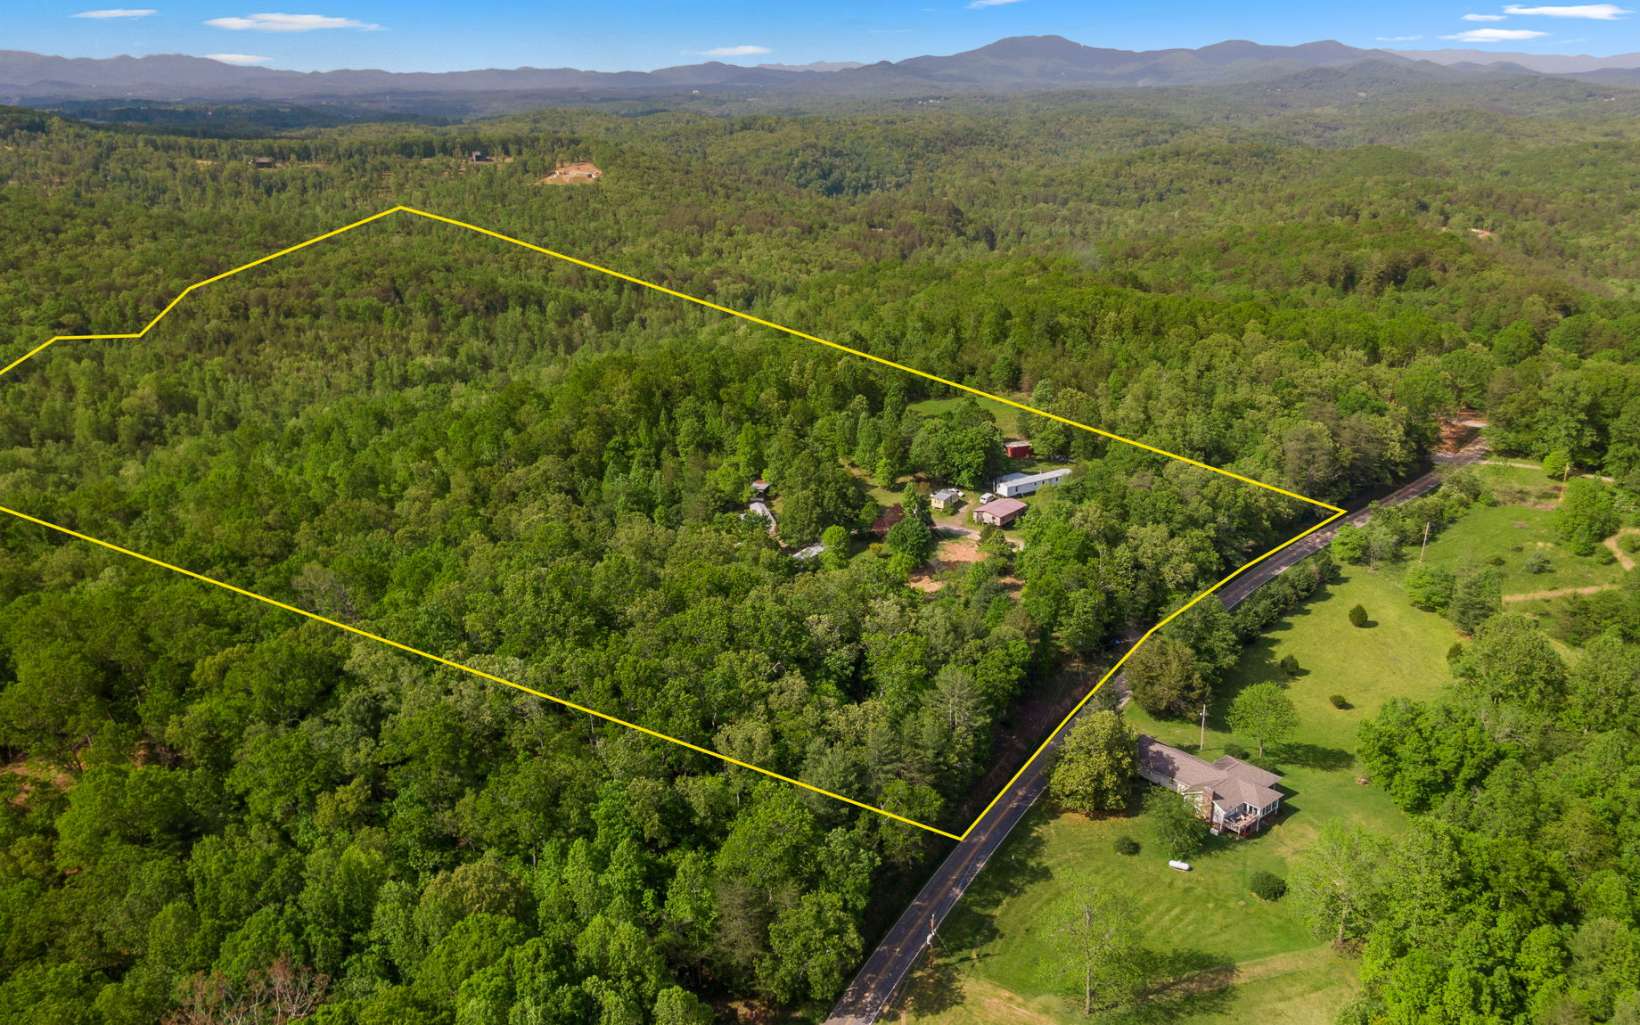 "30" Acres of Prime Location with immense developing opportunities!! Calling all Investors, Builders, and Developers!! A Rare Diamond of a Location here in The North Georgia Mountains. Just minutes from both Blue Ridge Downtown and McCaysville. This Tract of Land boast huge potential for Great Mountain views, Ideal for a modern Mountain Subdivision or an extremally private tract for a compound Getaway nestled conveniently minutes from Walmart and Blue Ridge Hospital.